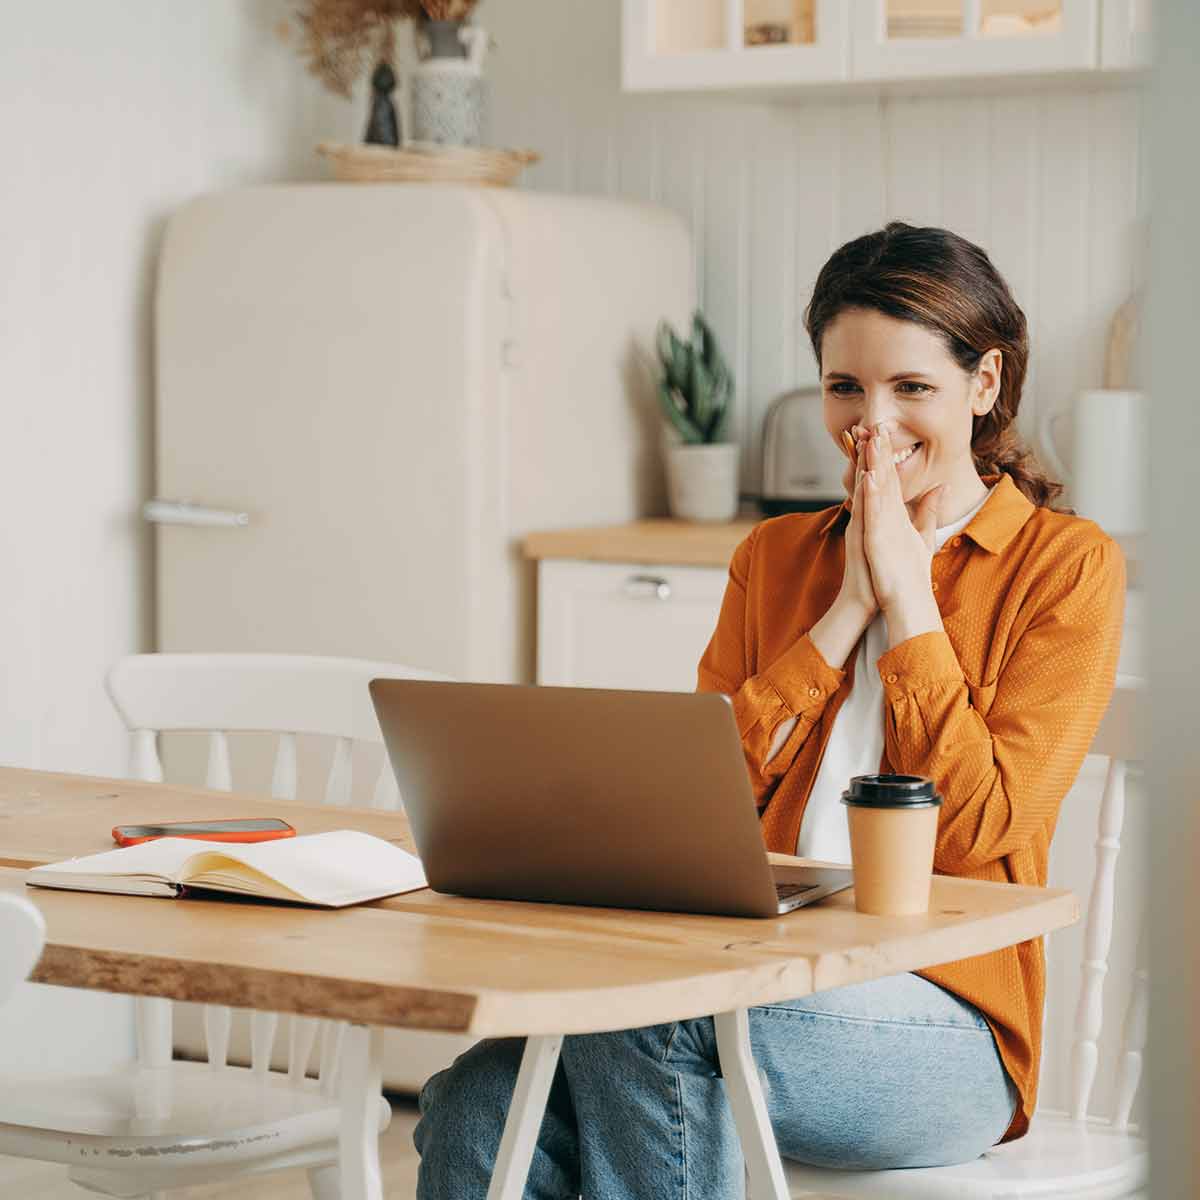 Woman seated in her kitchen looking at her computer - happy about the product she’s found on the Built for Home Product Guide website.